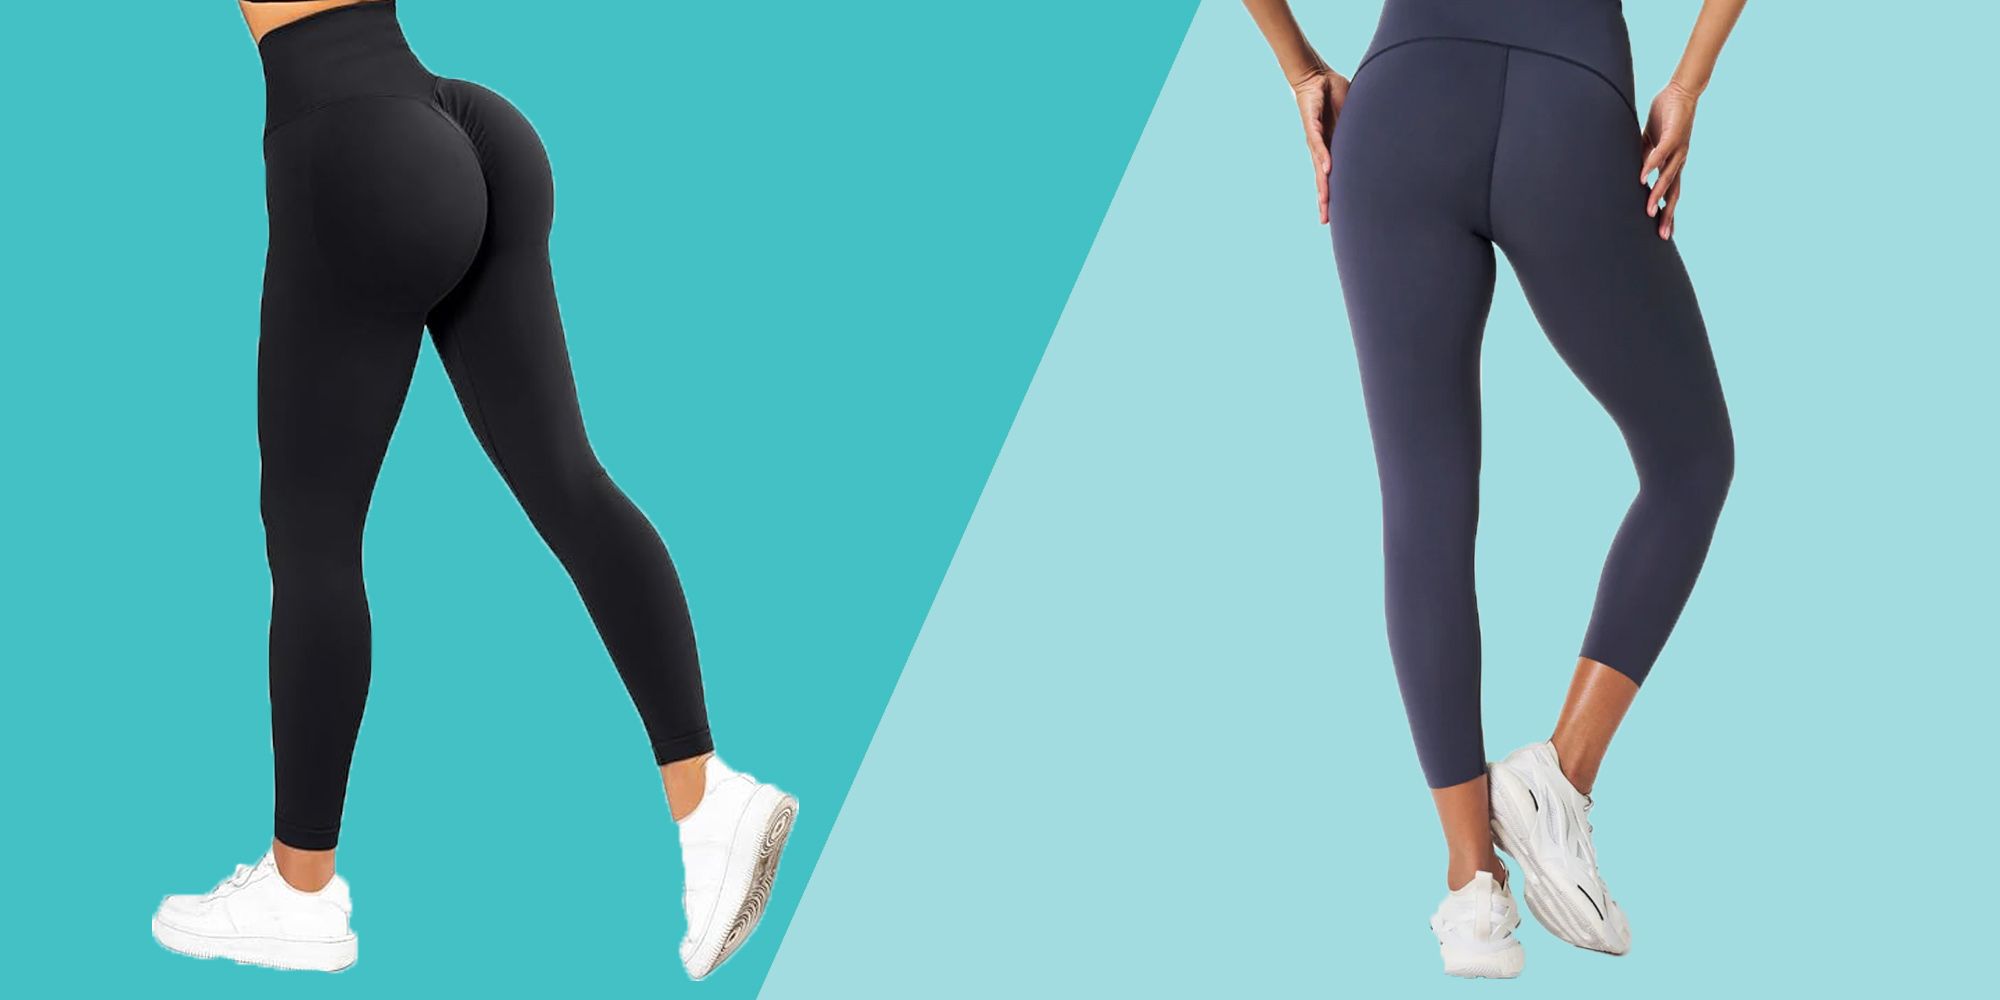 Yoga Pants or Leggings? What is the Difference? - Rebel Apparel